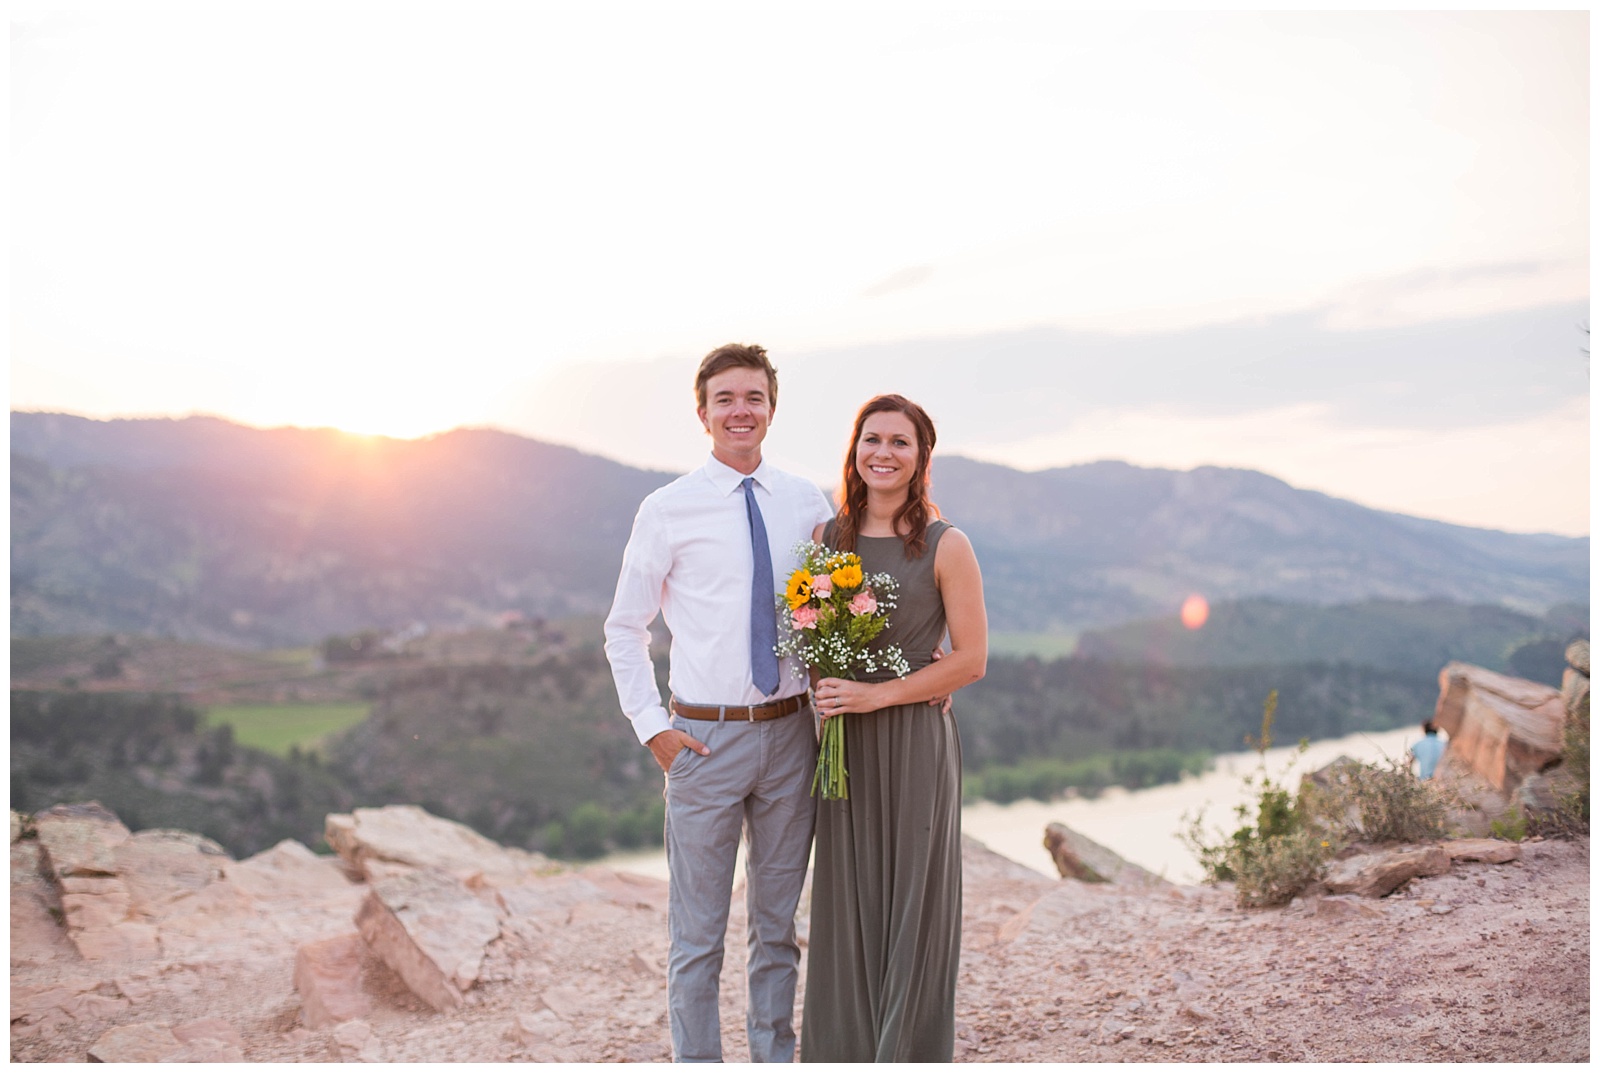 Colorado Engagement Session | Monica Brown Photography | monicabrownphoto.com